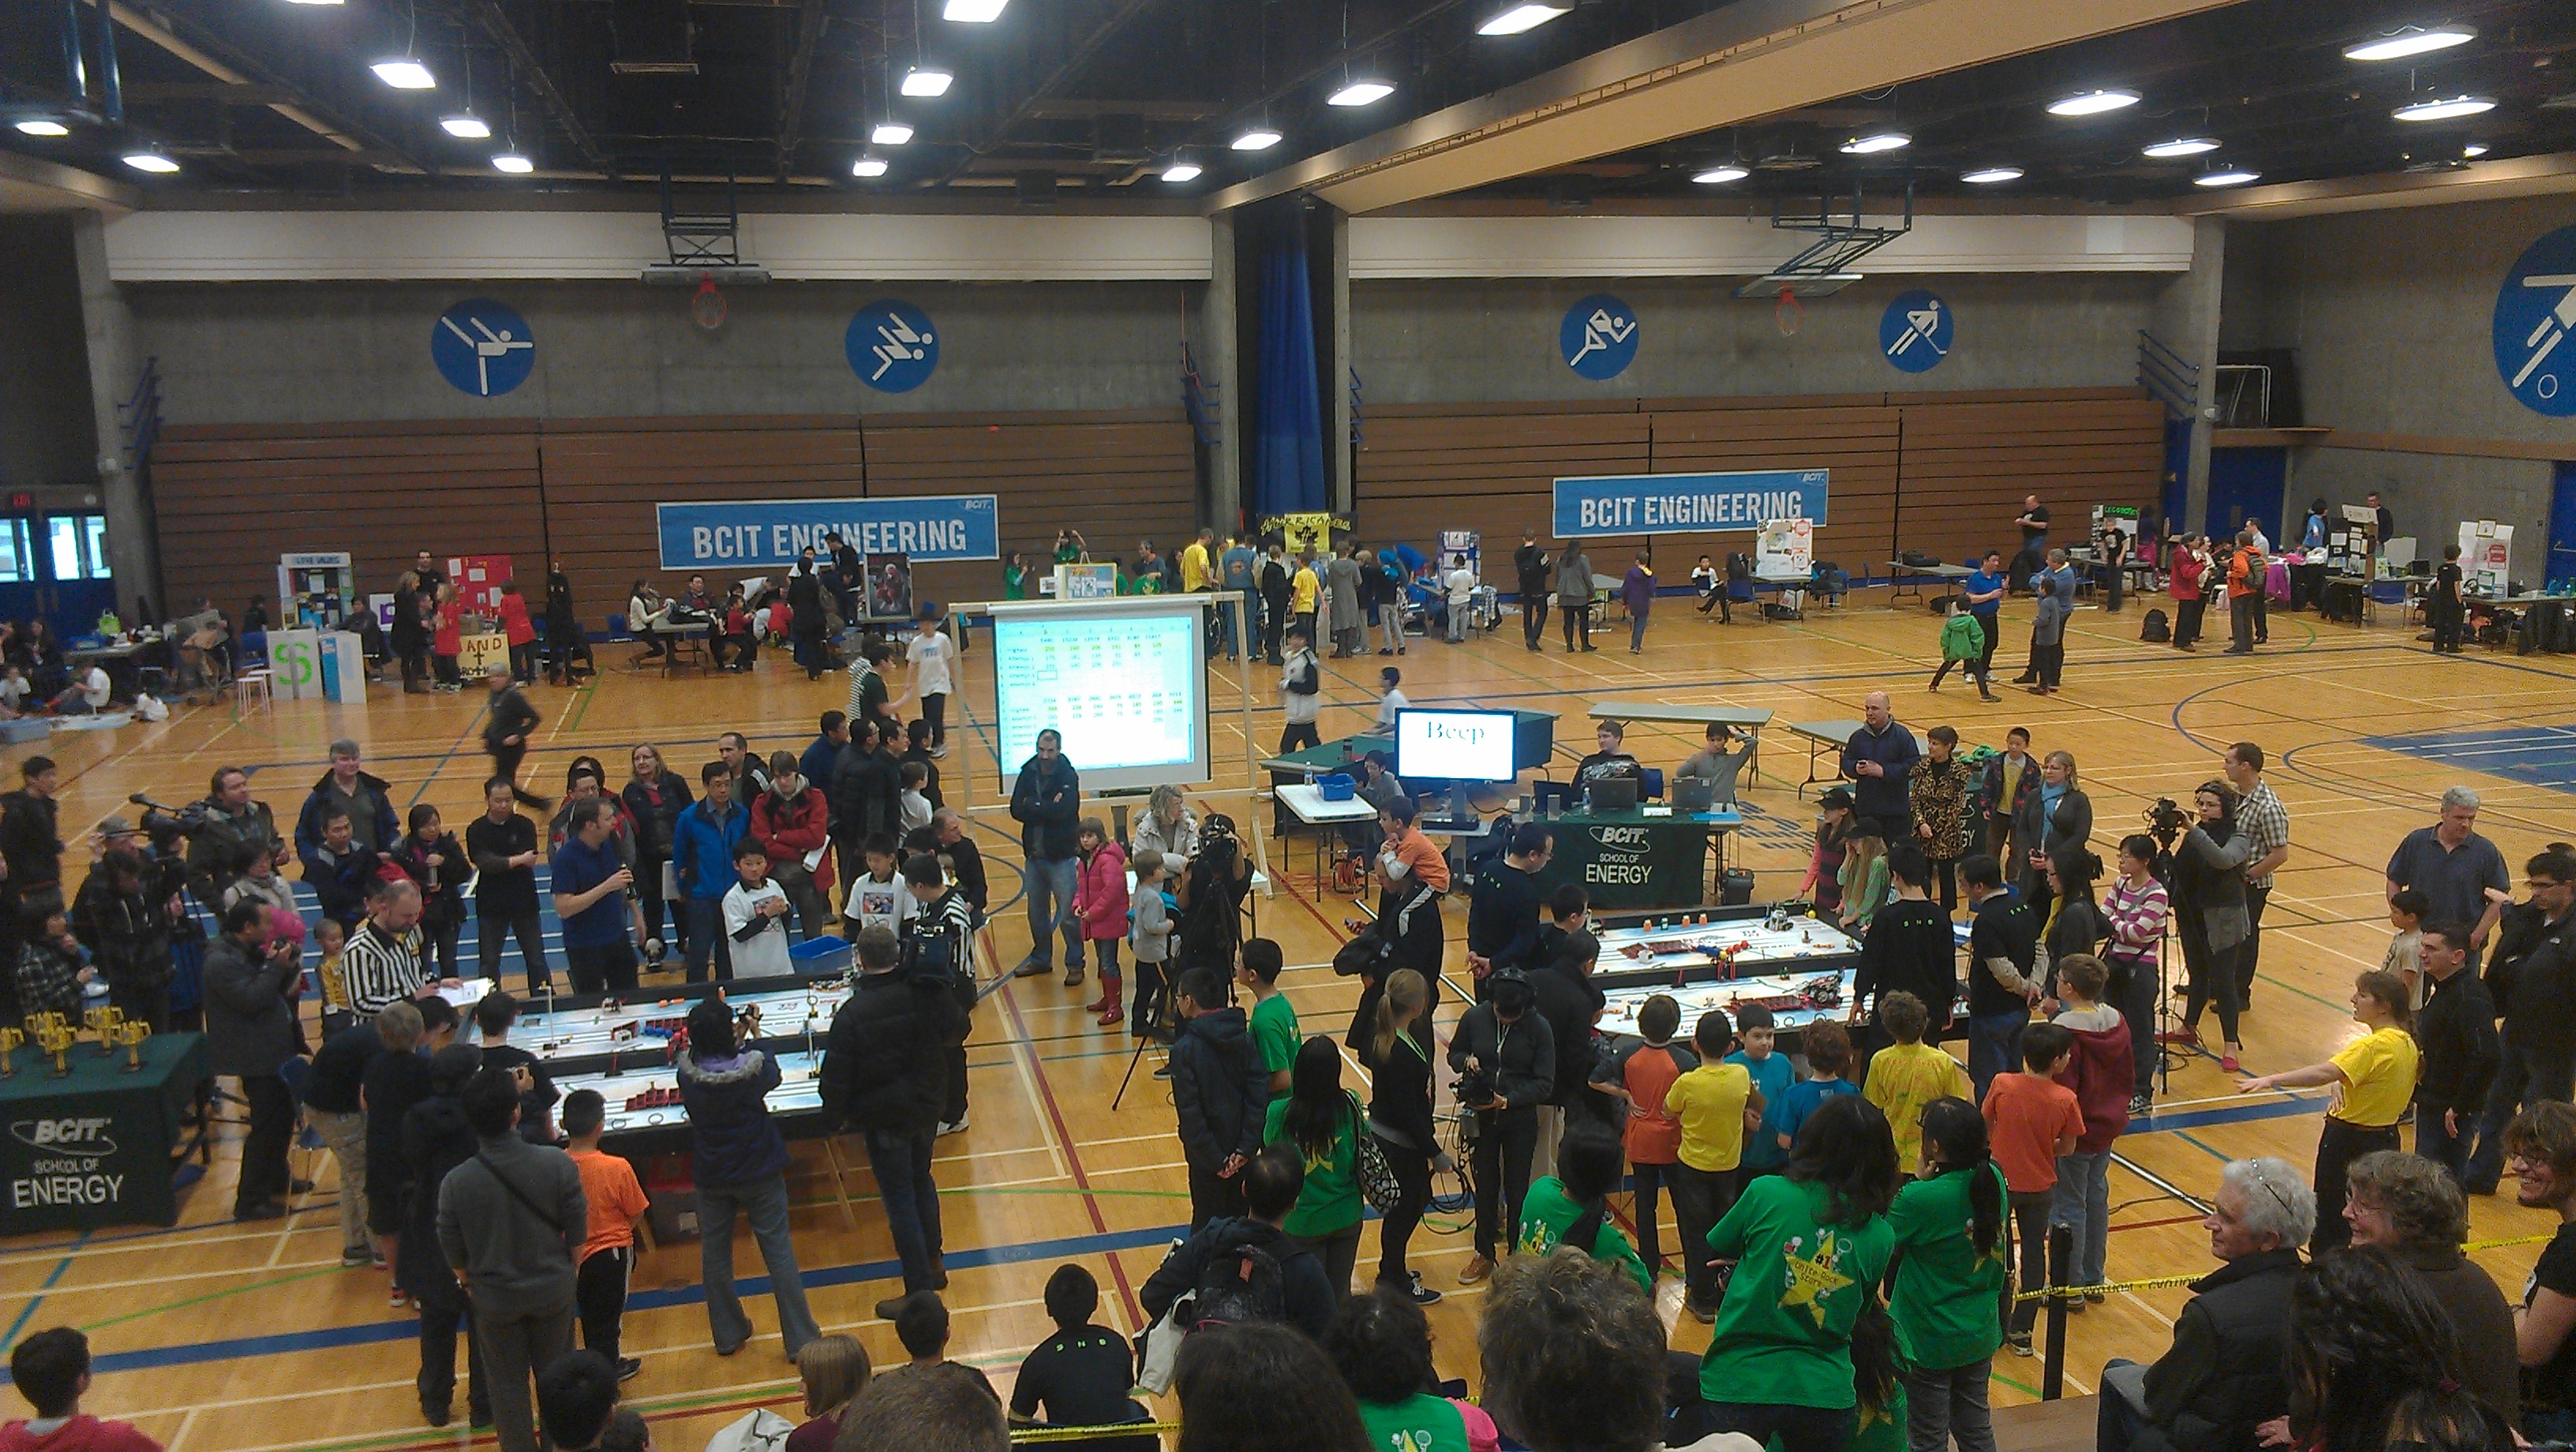 The robot competition